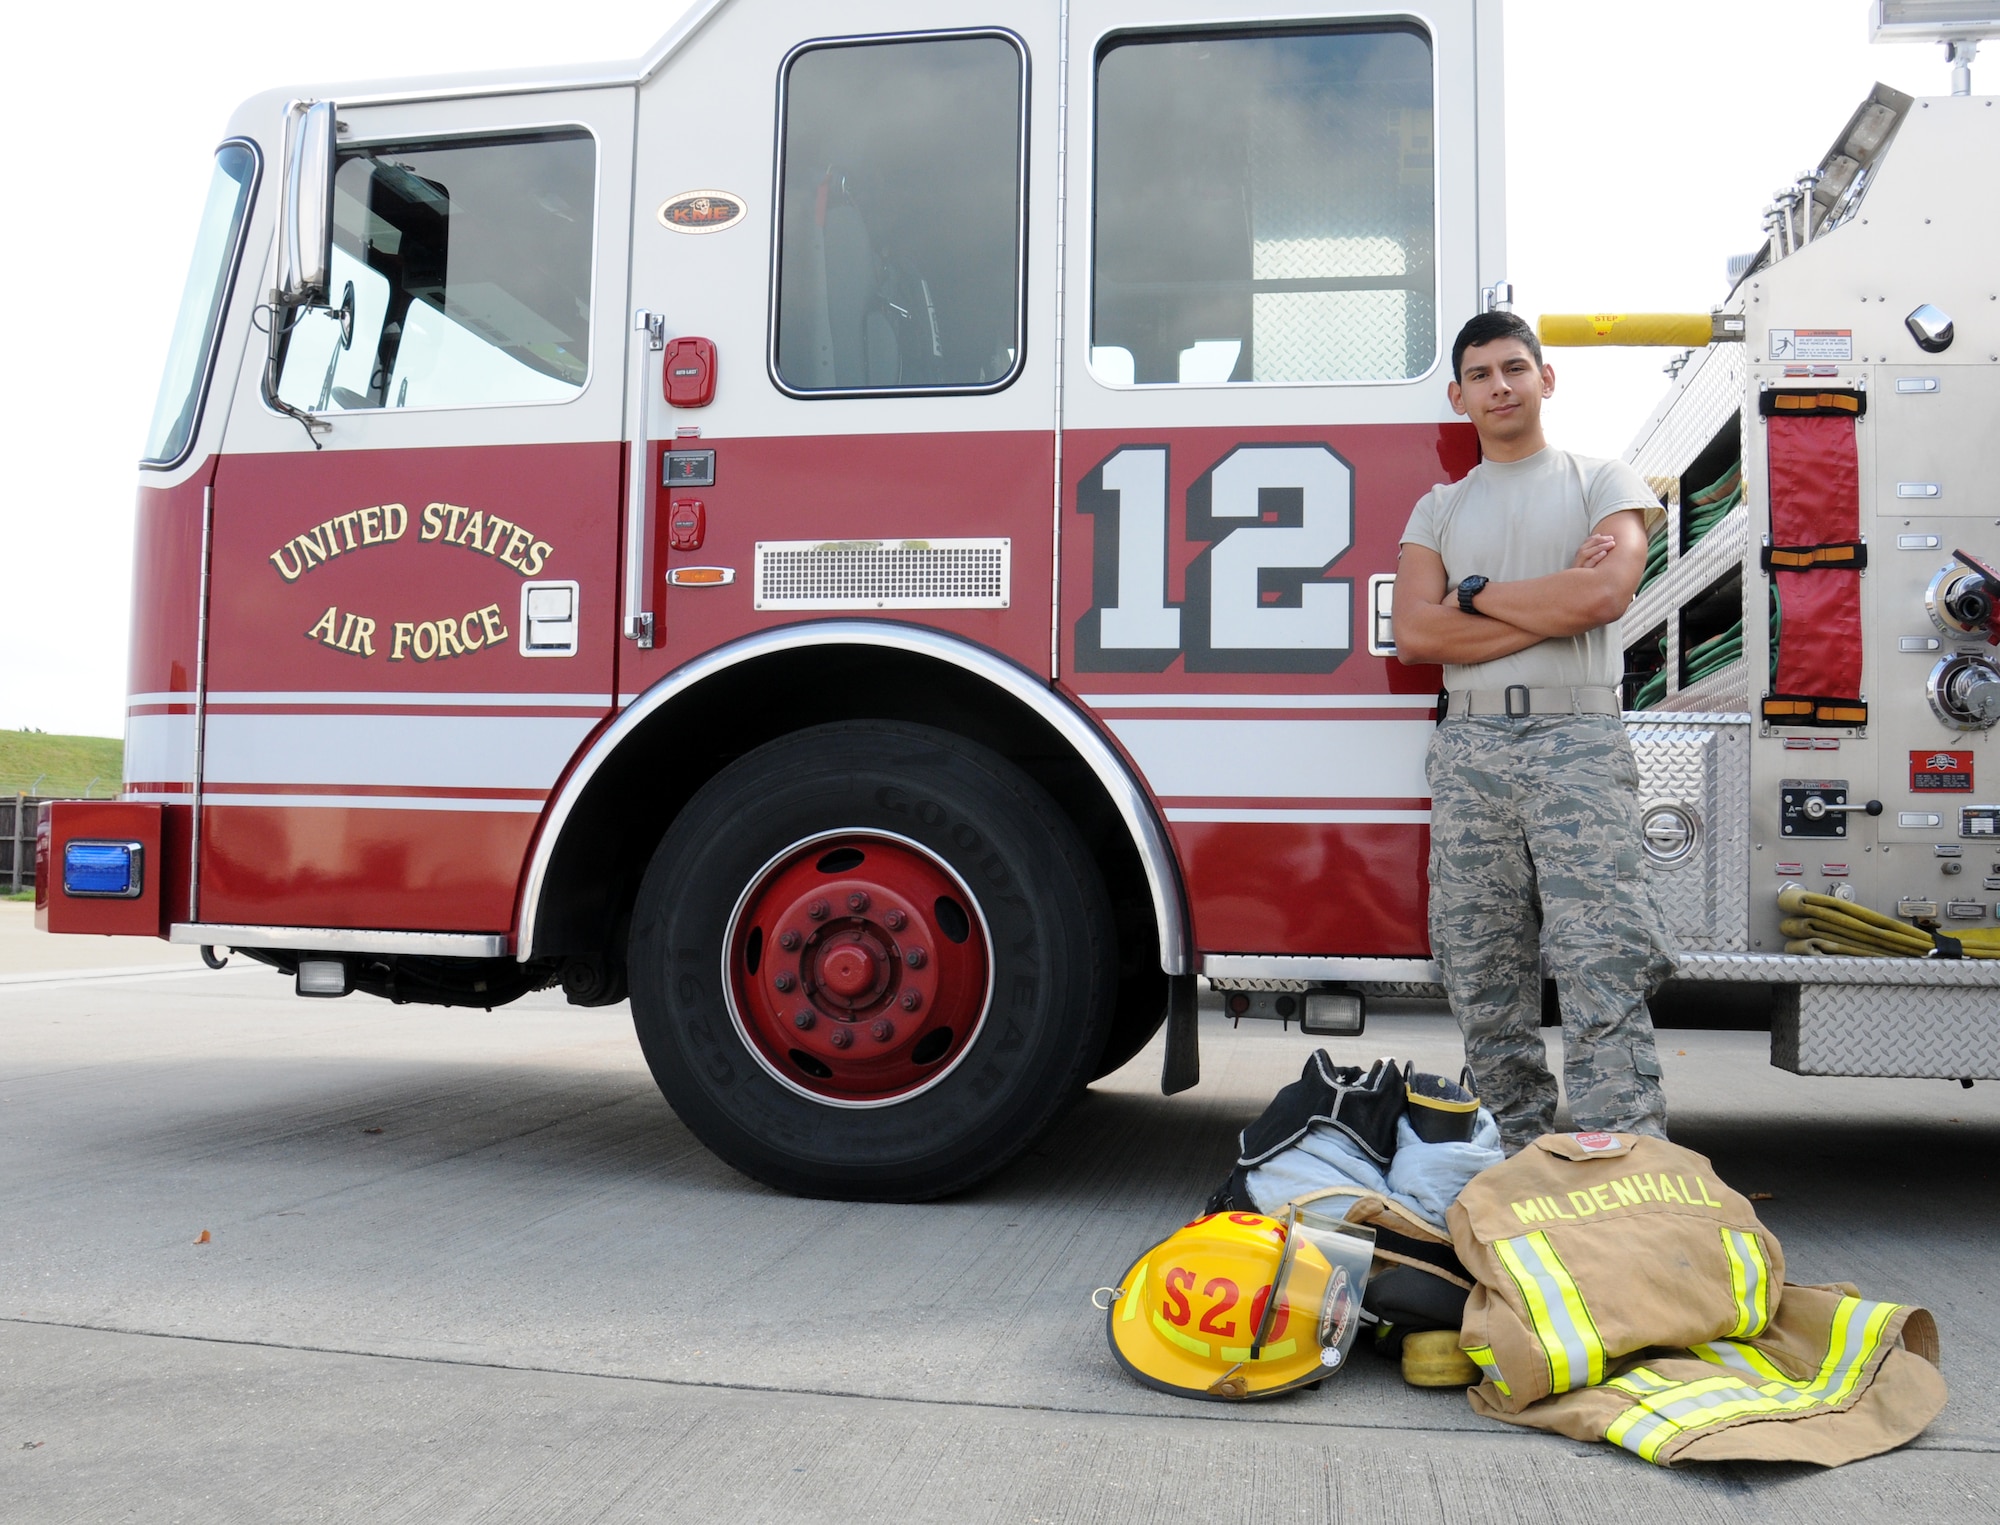 U.S. Air Force Airman 1st Class Jacob Sandoval, 100th Civil Engineer Squadron fire protection journeyman from Pleasanton, Texas, poses in front of a fire truck with his protective equipment Sept. 10, 2014, at the fire department on RAF Mildenhall, England. Sandoval completed one year of service in the Air Force in August 2014. (U.S. Air Force photo/Gina Randall/Released)